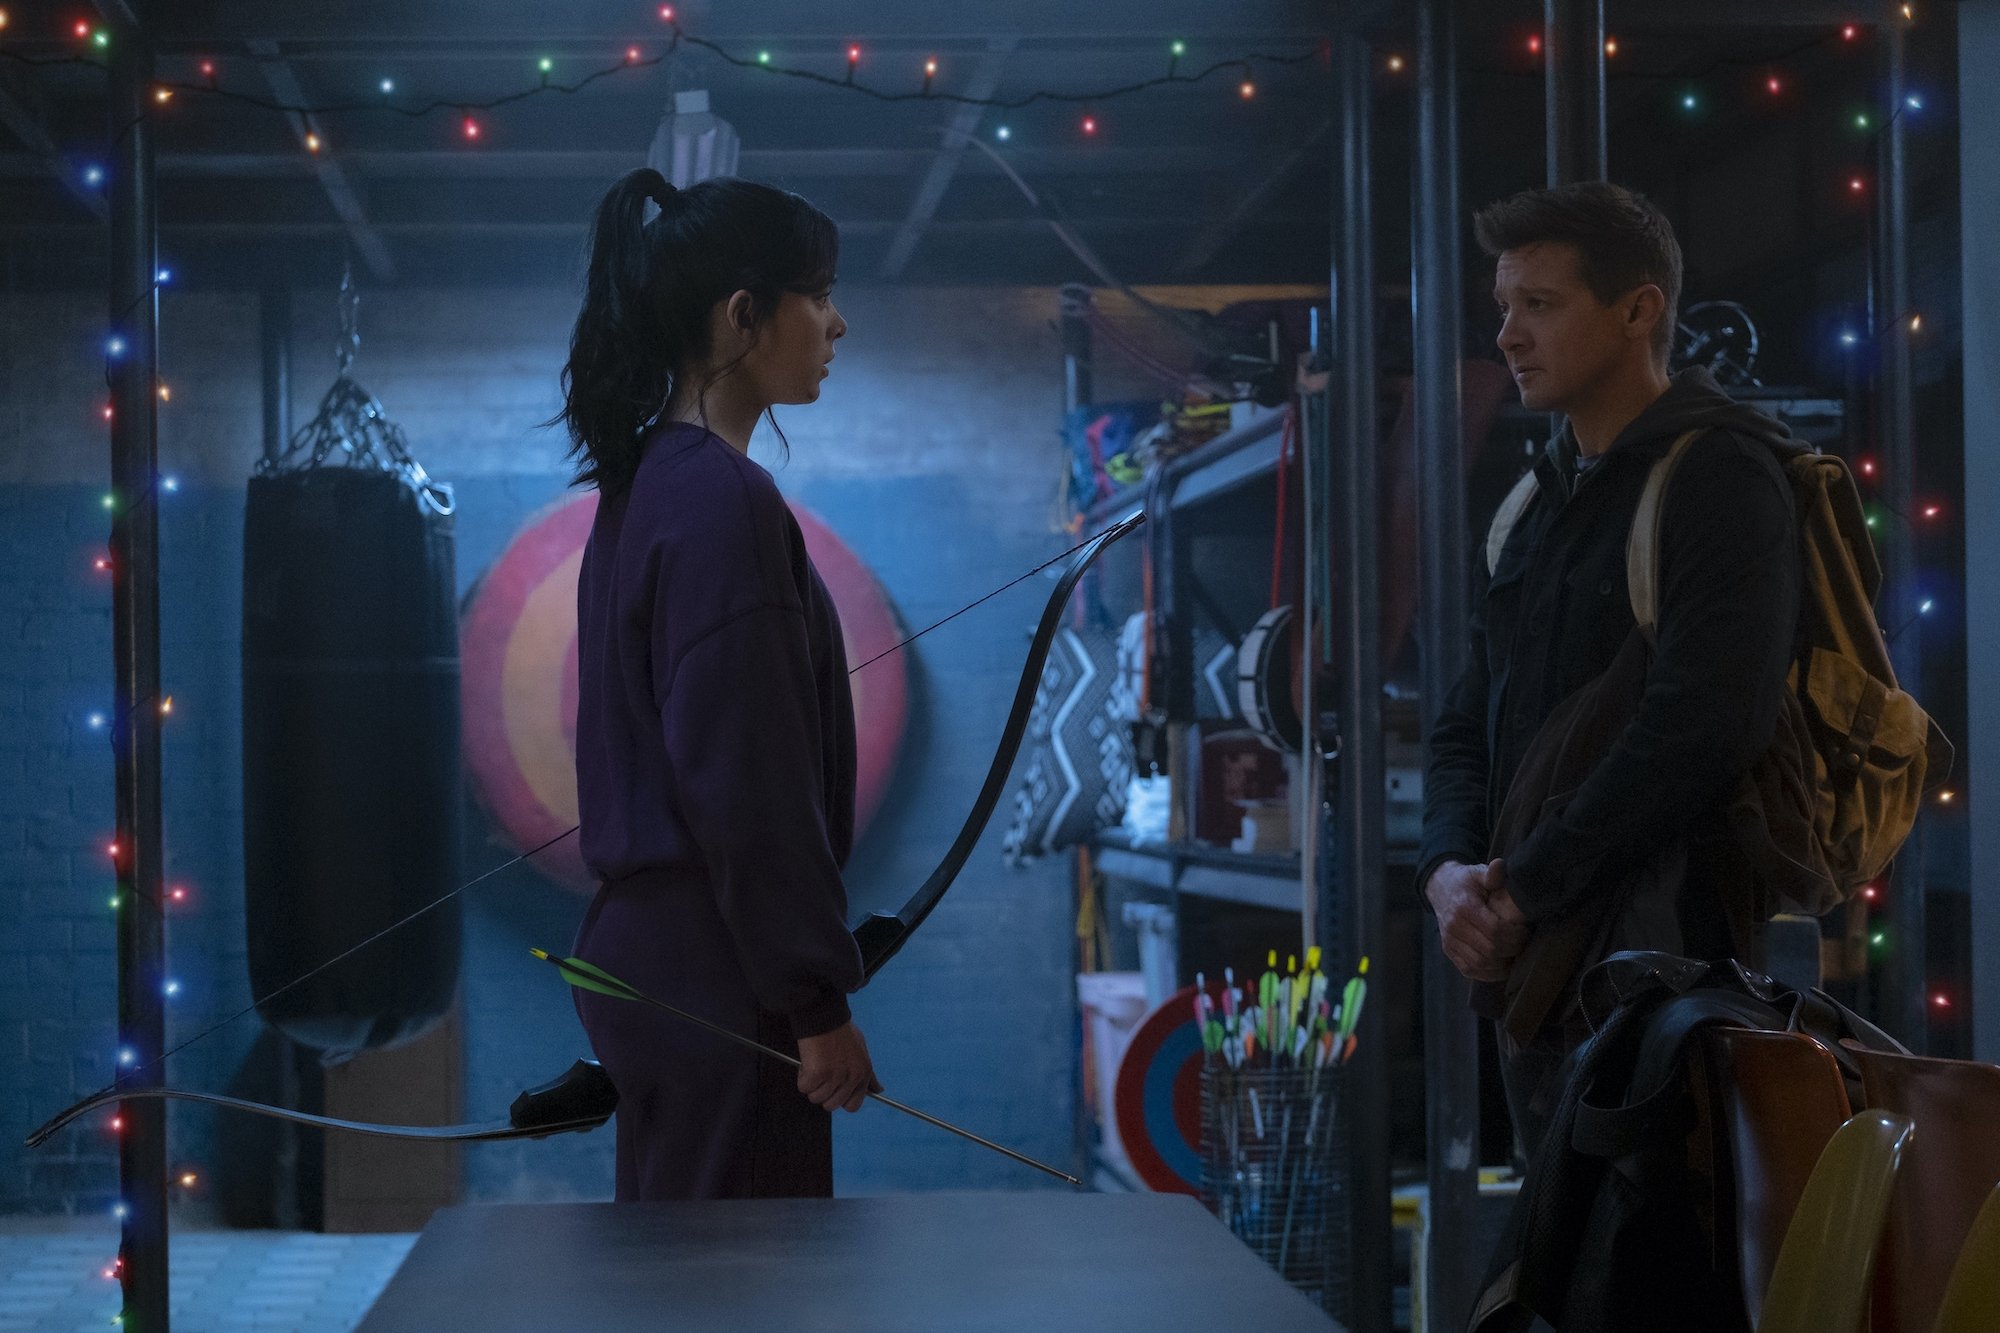 Hailee Steinfeld as Kate Bishop and Jeremy Renner as Clint Barton in the new Disney+ series 'Hawkeye'